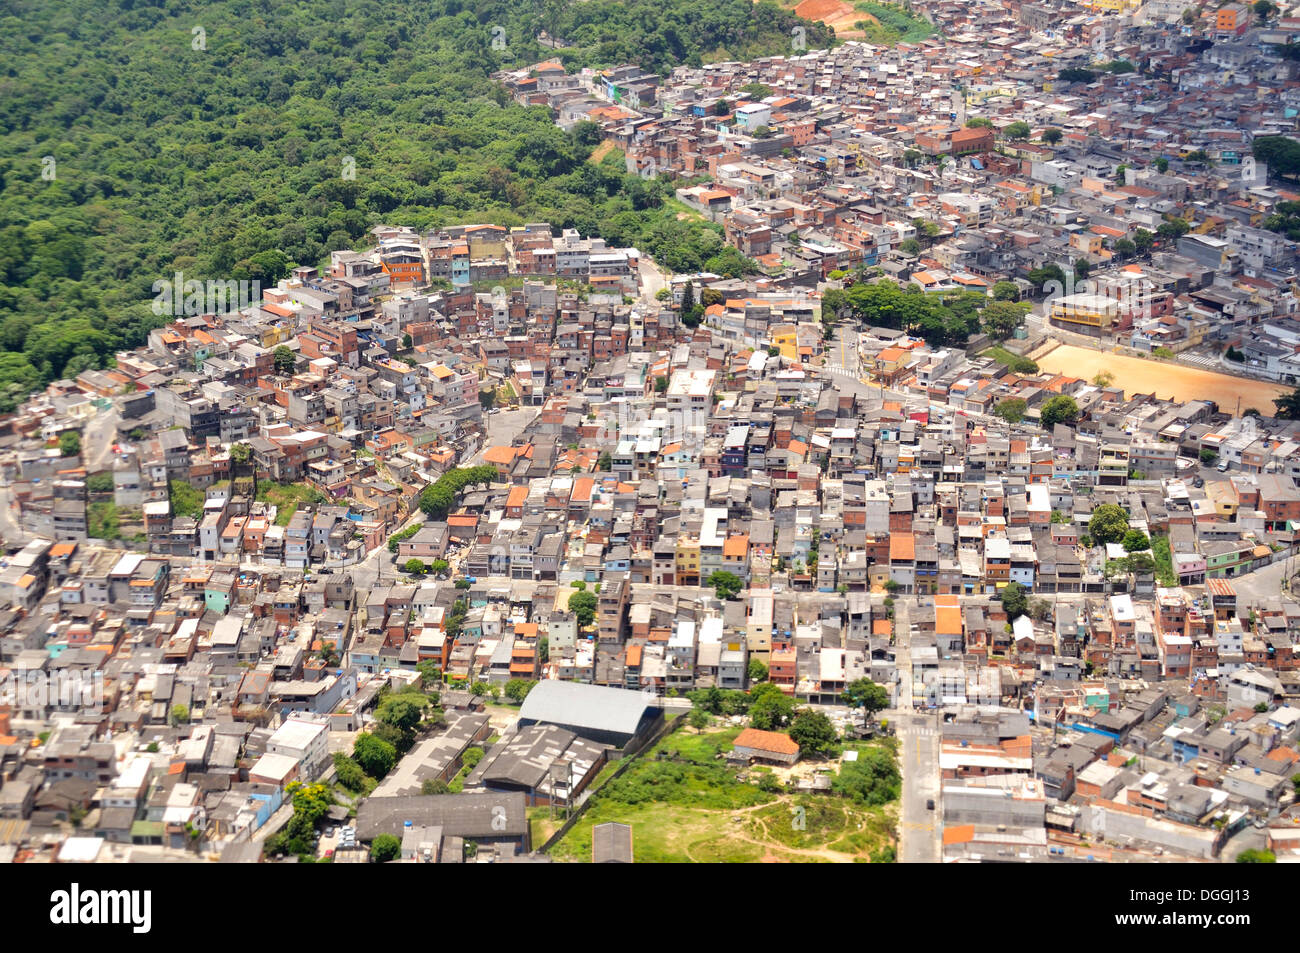 Aerial view of a Favela, slum area on the outskirts of Sao Paulo, town invading the rain forest, Sao Paulo, Brazil Stock Photo